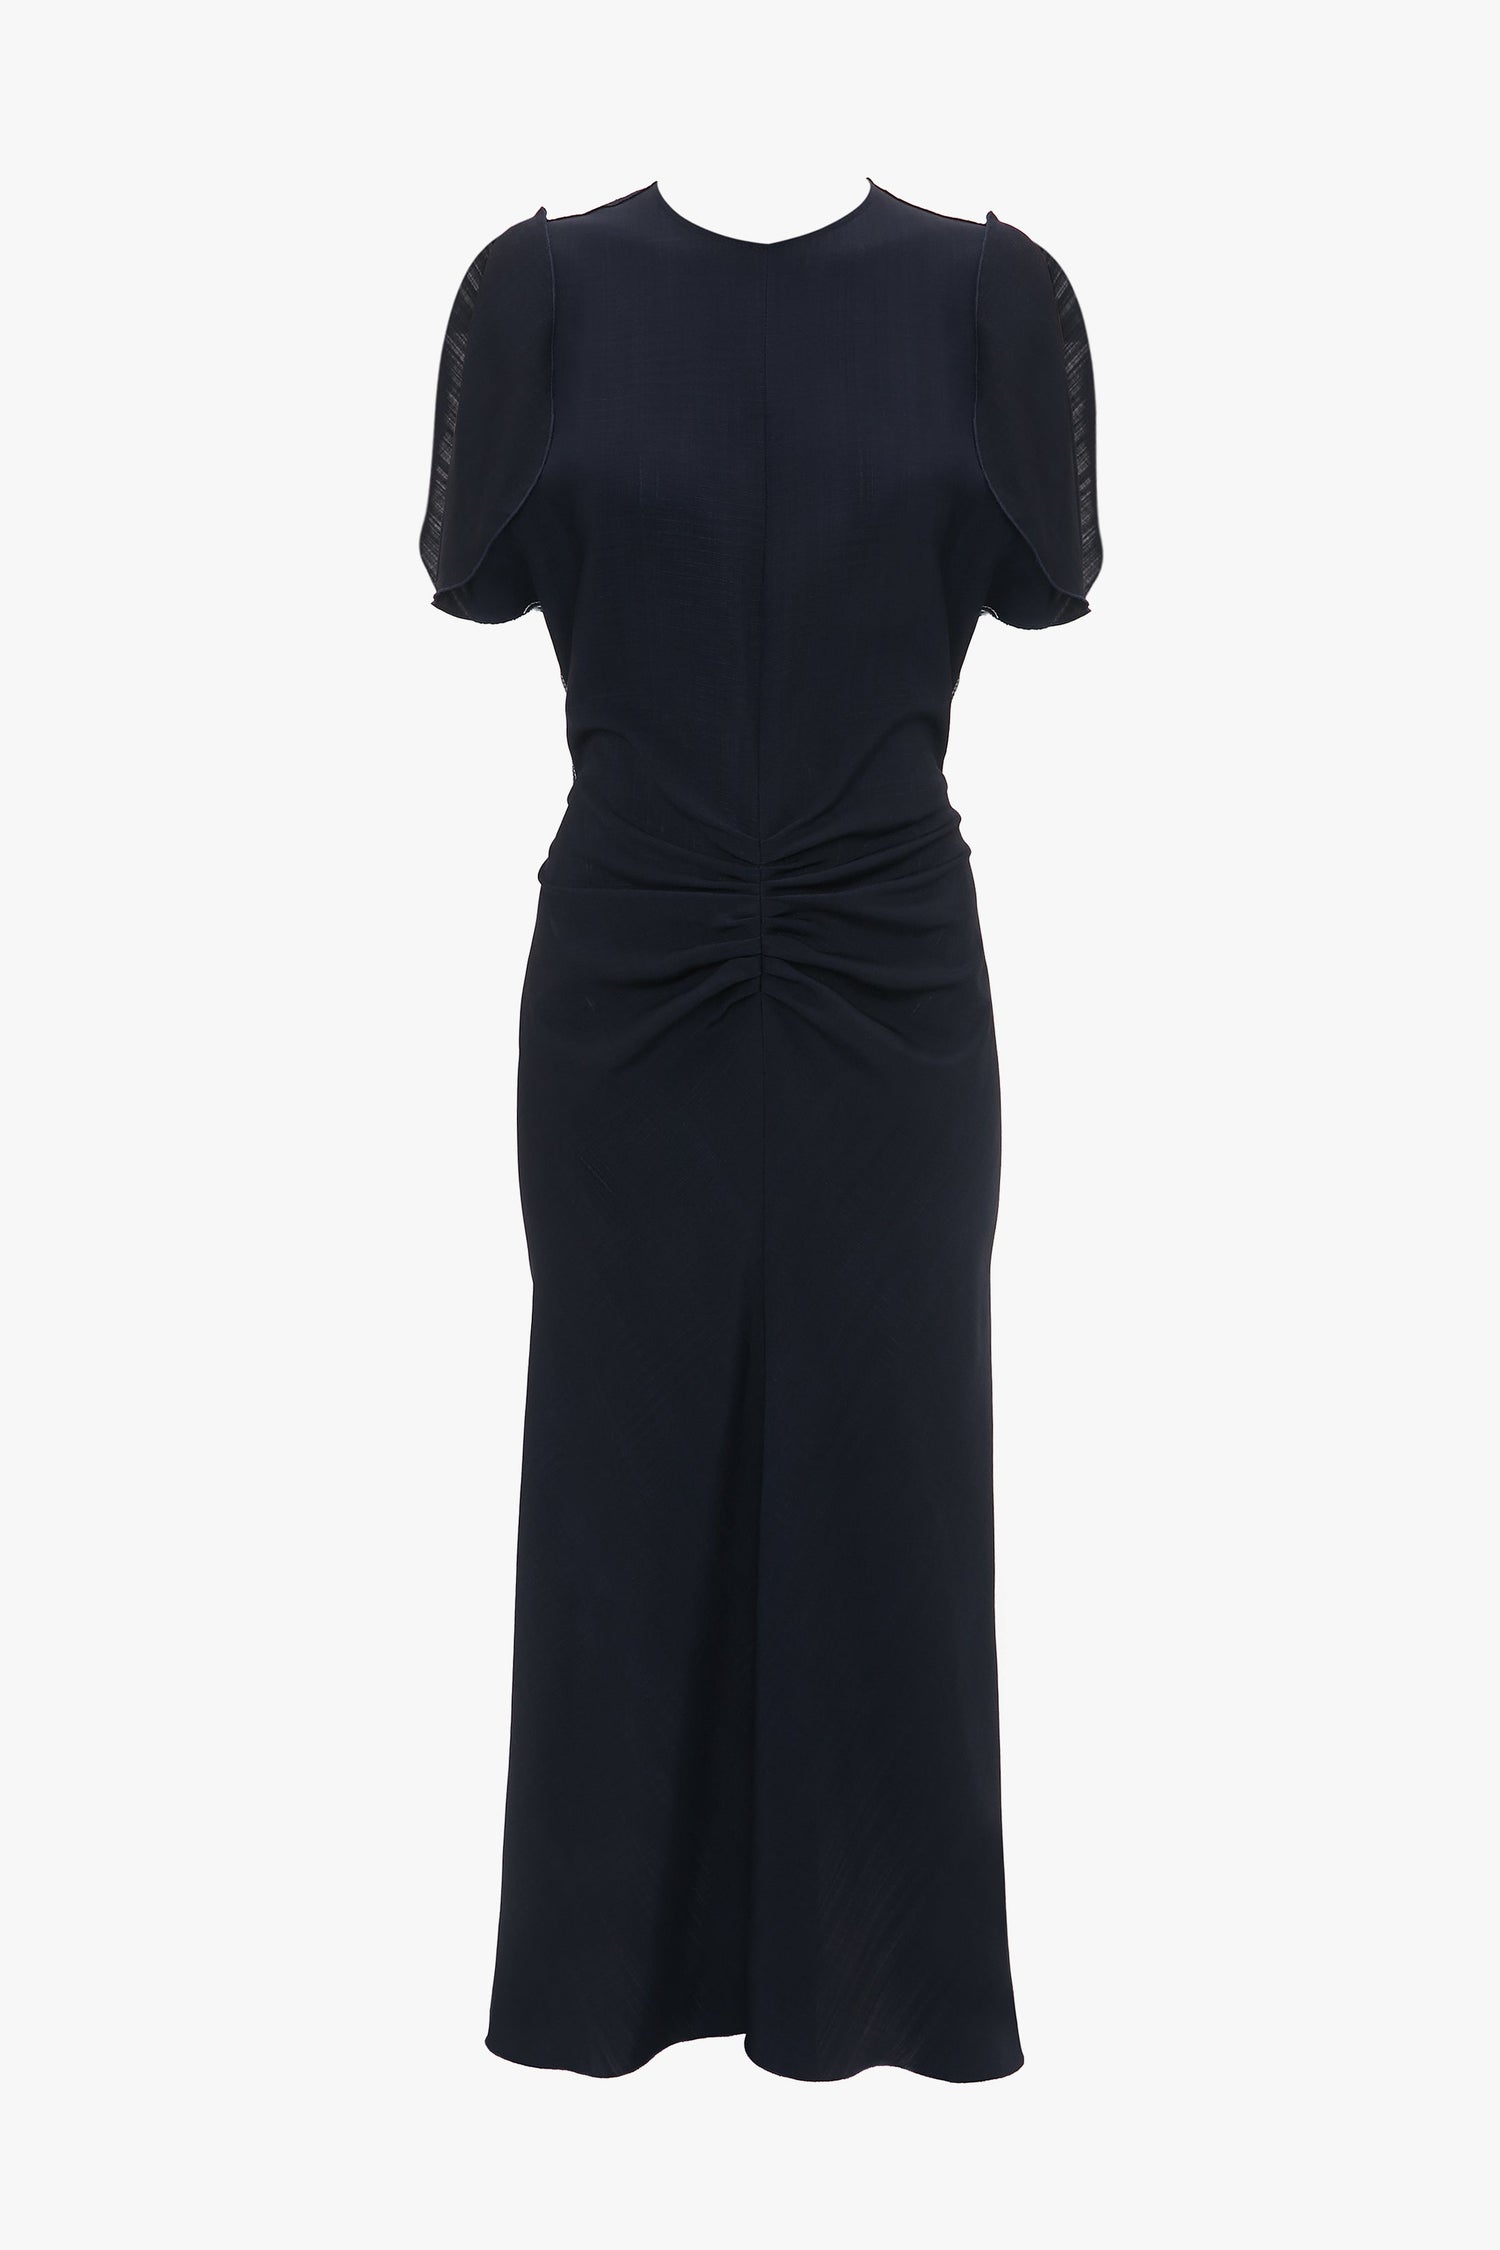 A Gathered V-Neck Midi Dress In Midnight by Victoria Beckham, a knee-length, short-sleeve, dark blue fit-and-flare silhouette dress with a high neckline, front ruched detail, and transparent fabric on the sleeves.